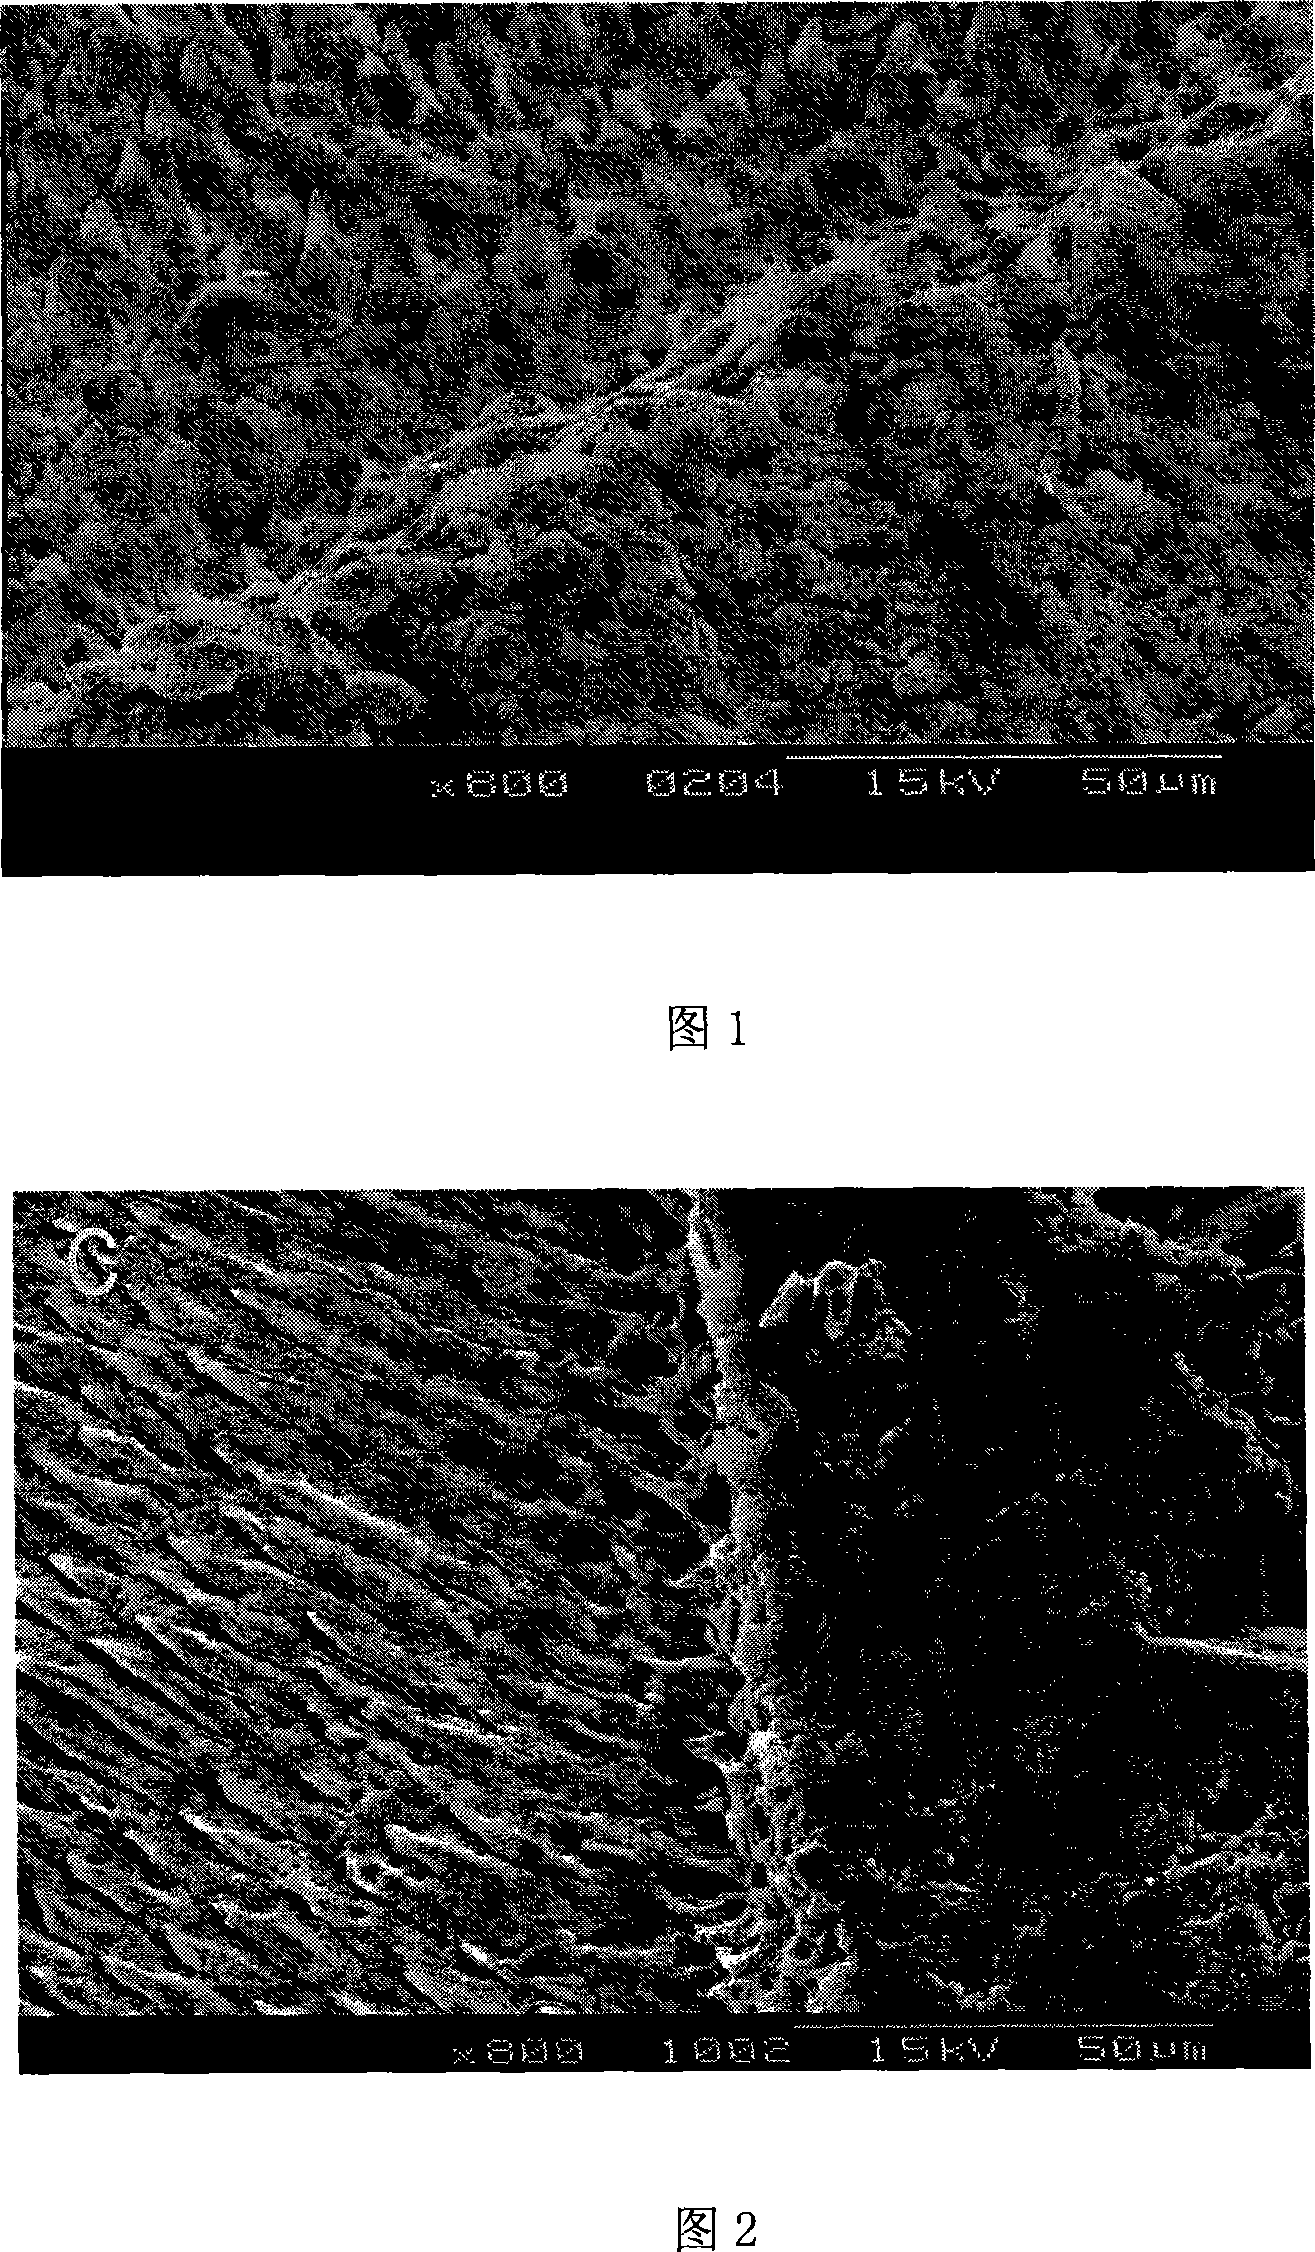 Method for preparing visible light solidified orthodontic binder containing 3-META functional monomer